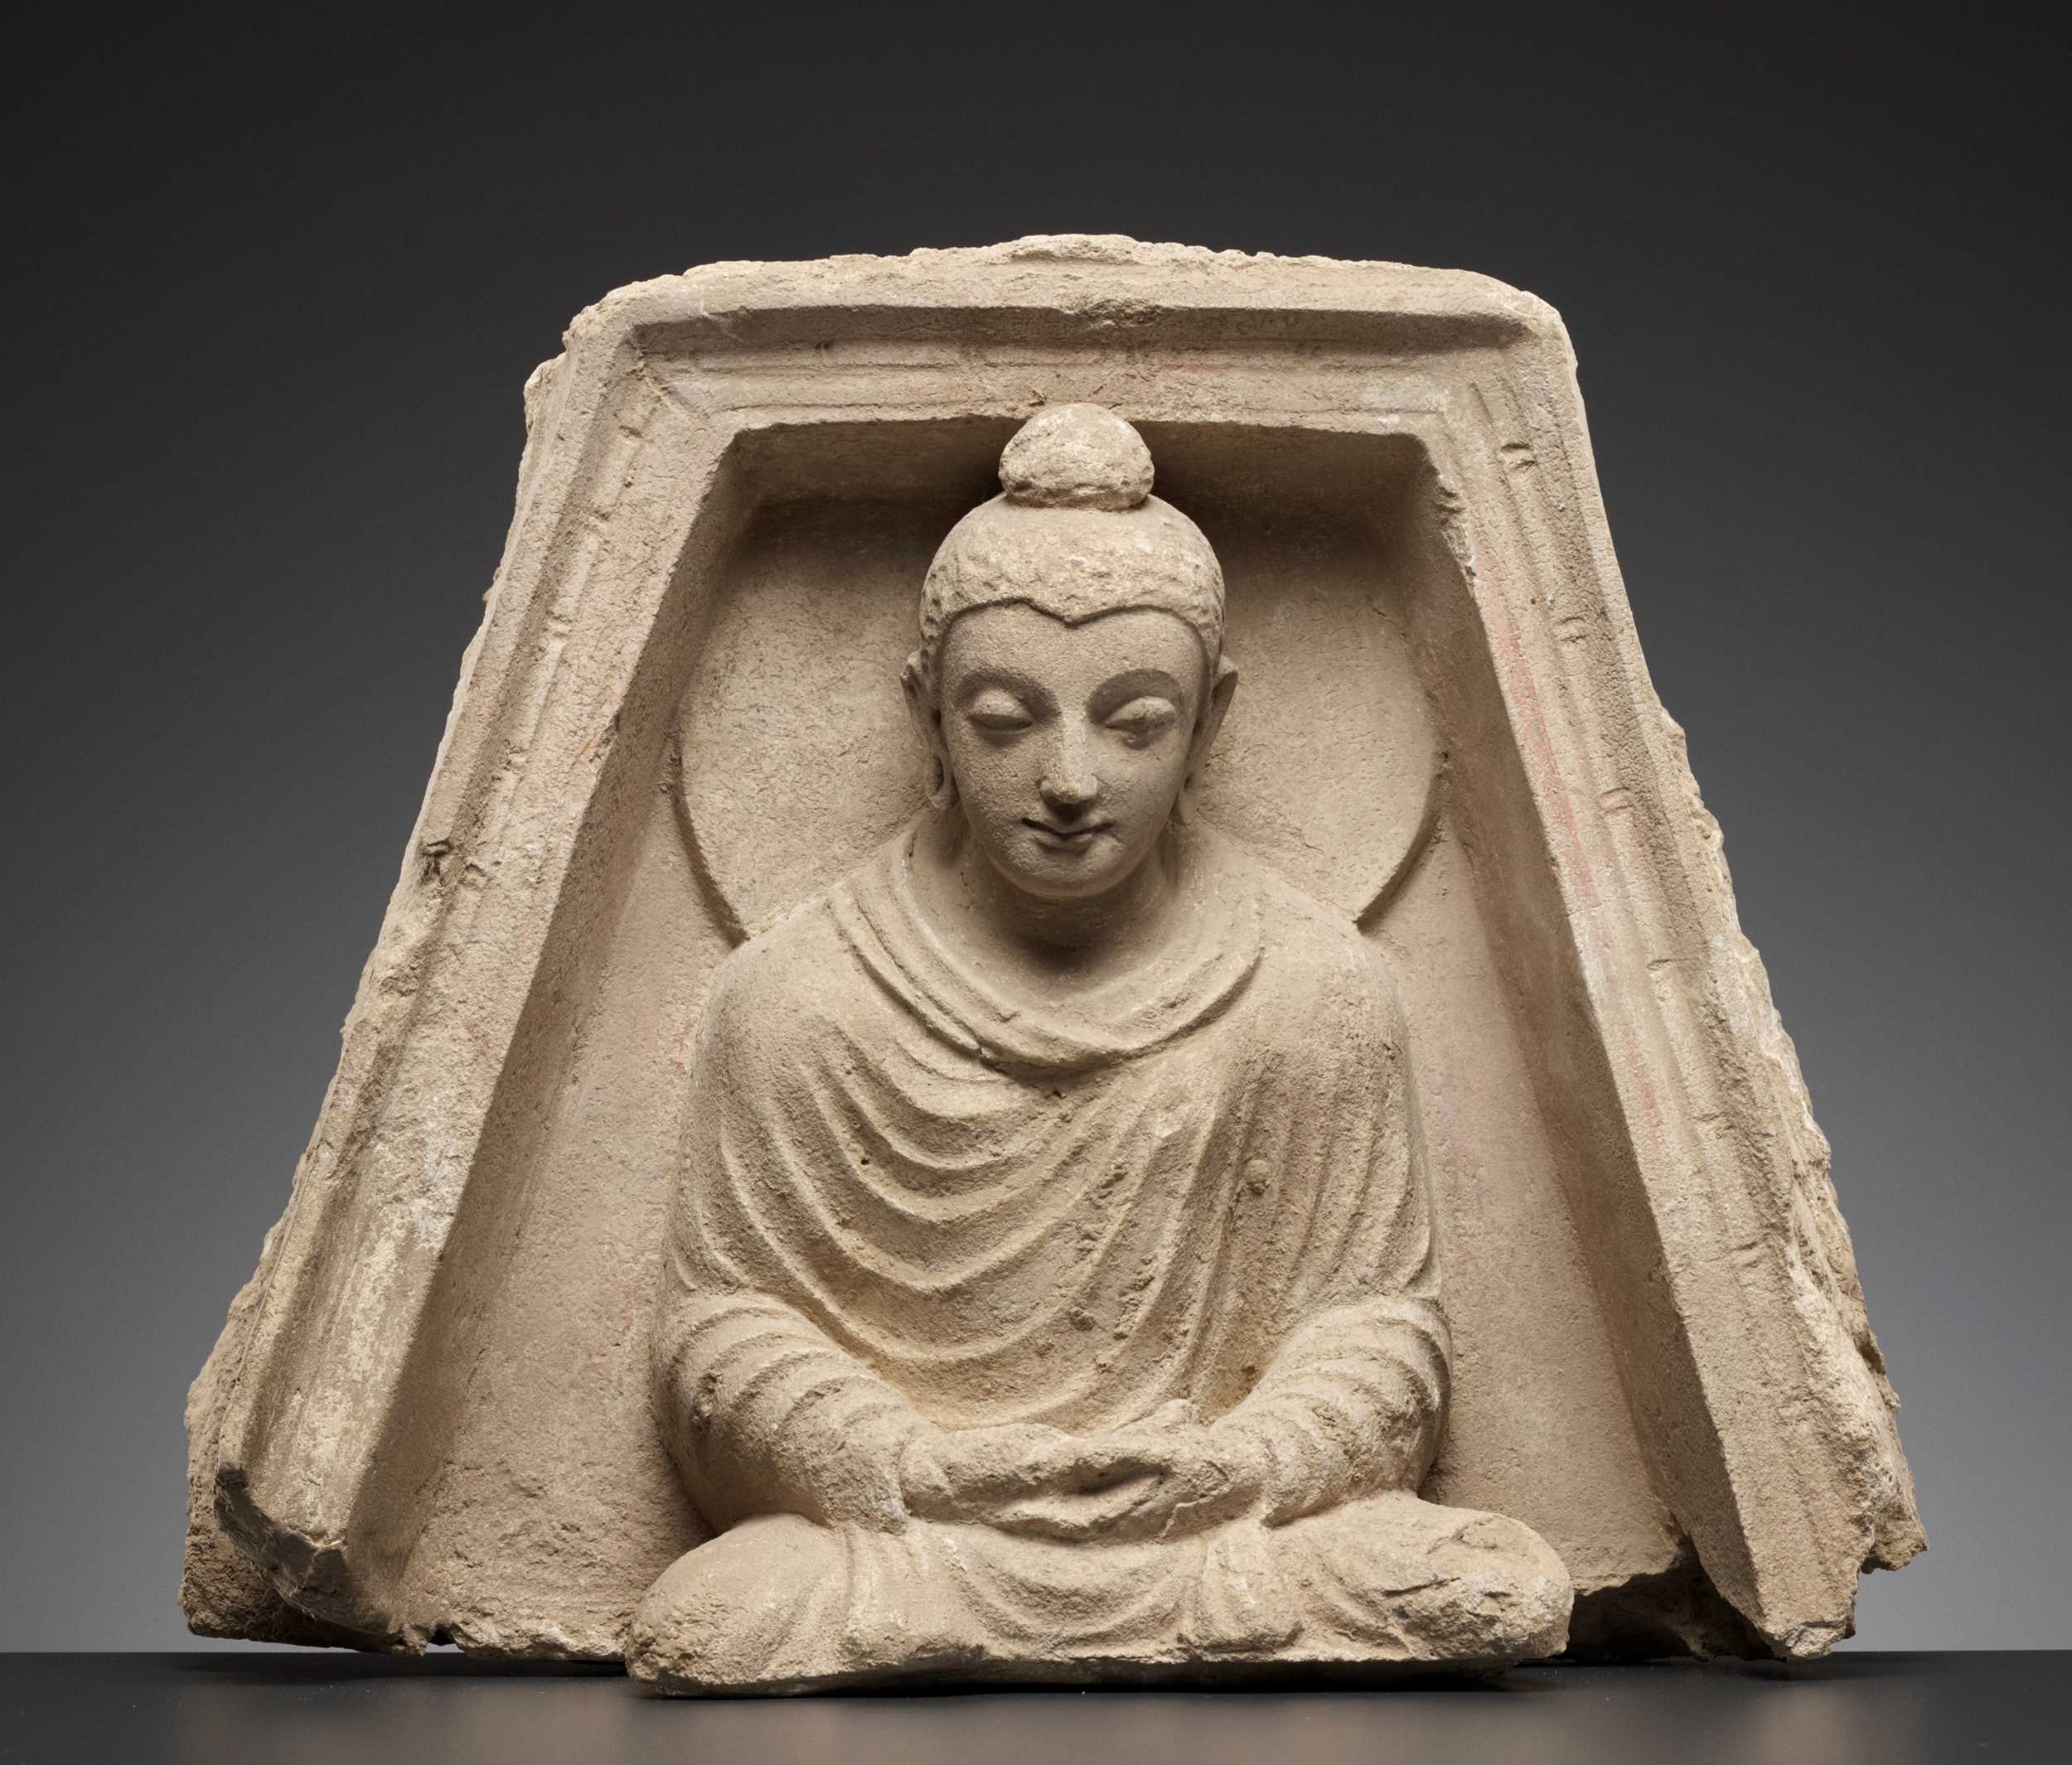 Lot 561 - A STUCCO RELIEF DEPICTING BUDDHA IN A TRAPEZOIDAL NICHE, KUSHAN PERIOD